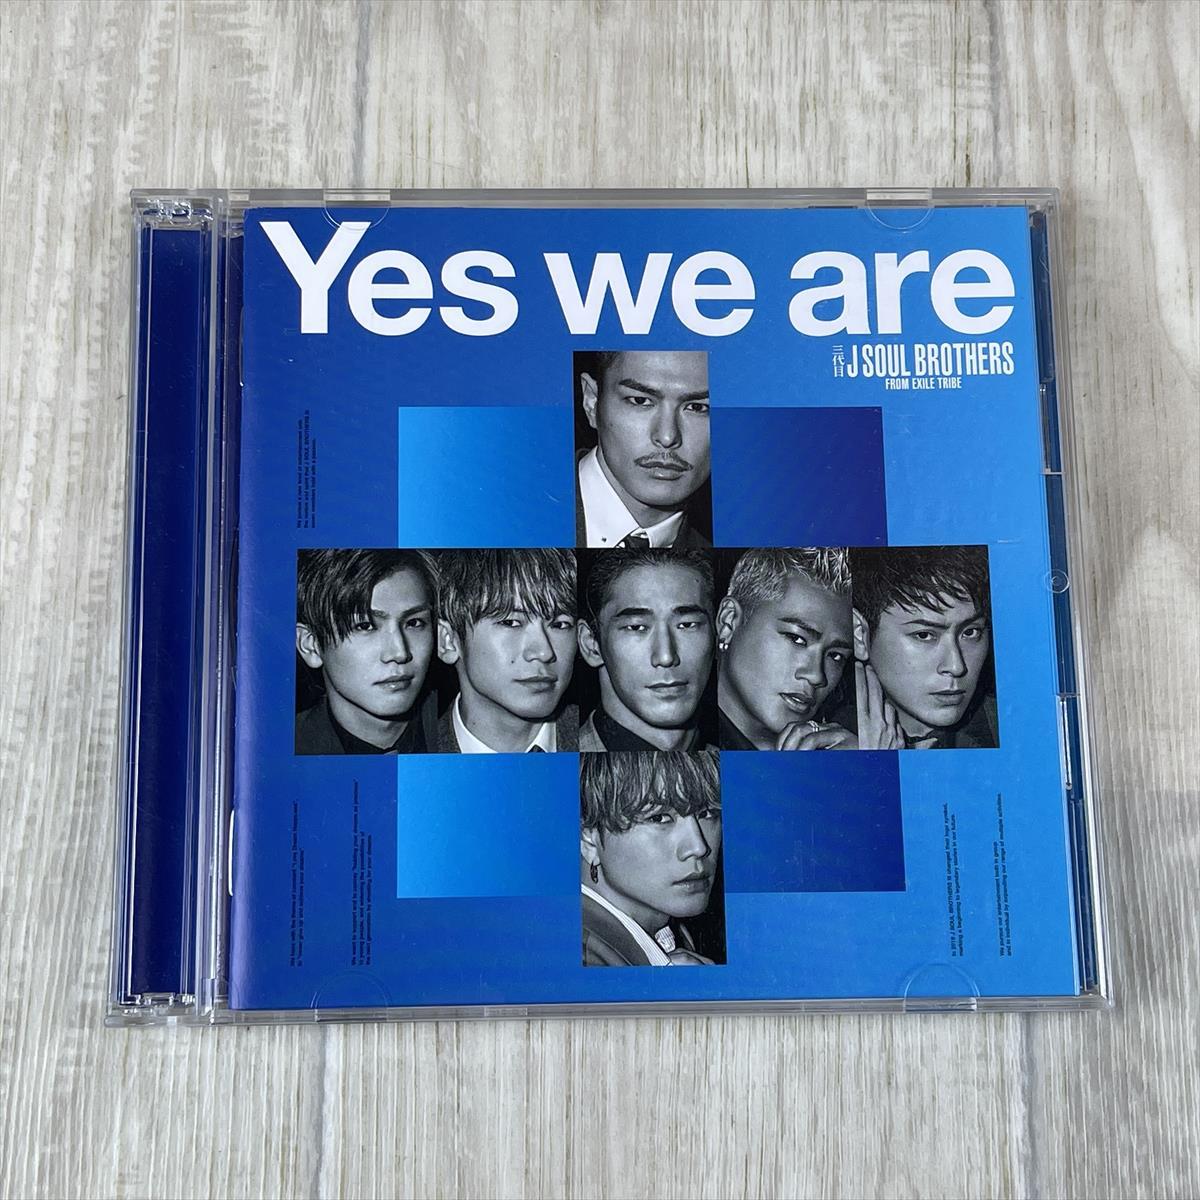 ほ180/zk　即決 CD Yes we are/三代目 J SOUL BROTHERS from EXILE TRIBE_画像1